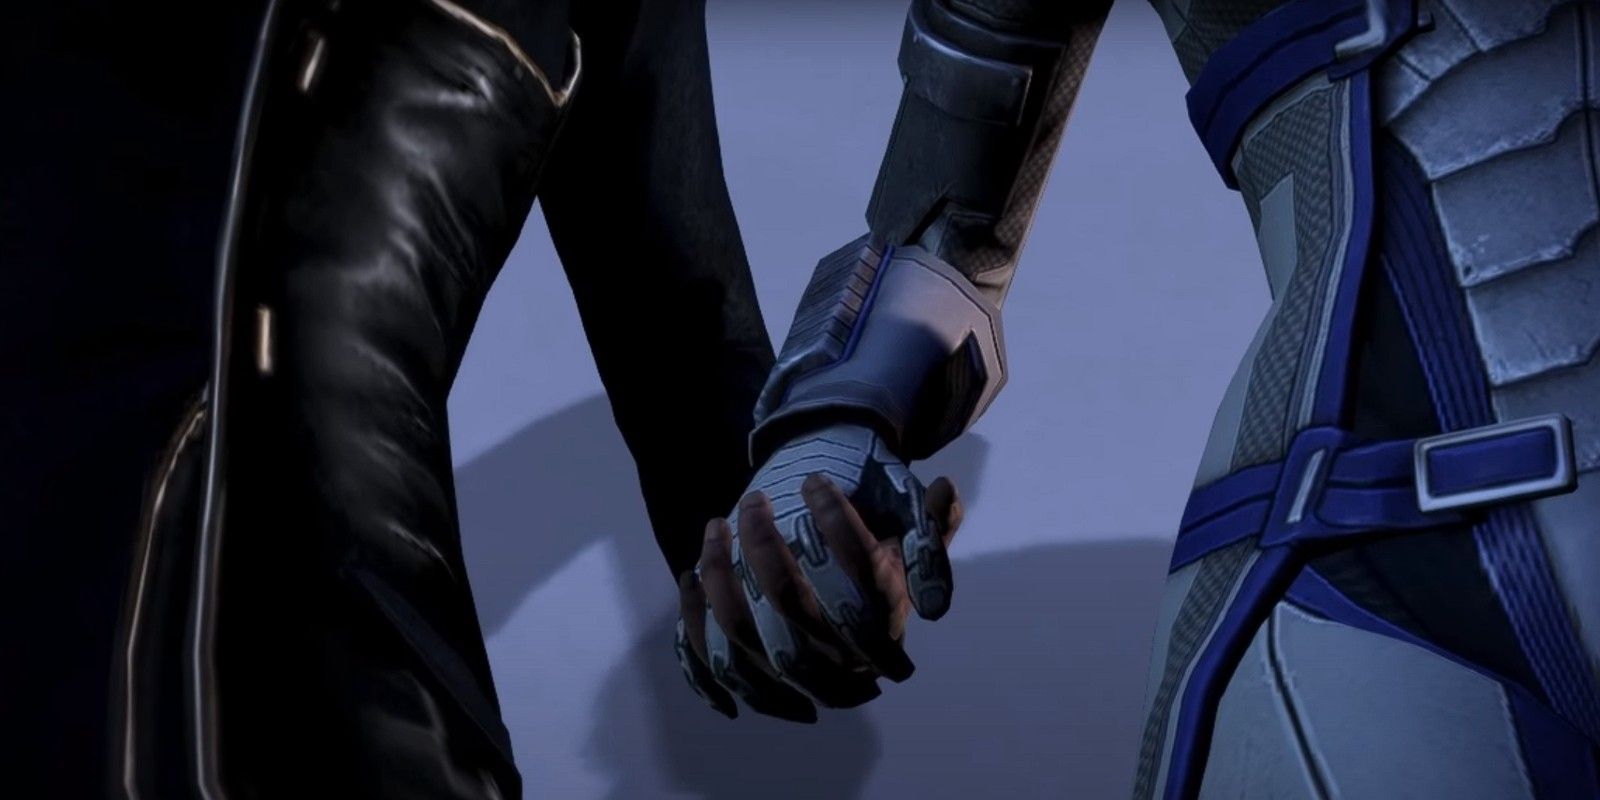 Liara and female Shepard hold hands in bed in Mass Effect 3